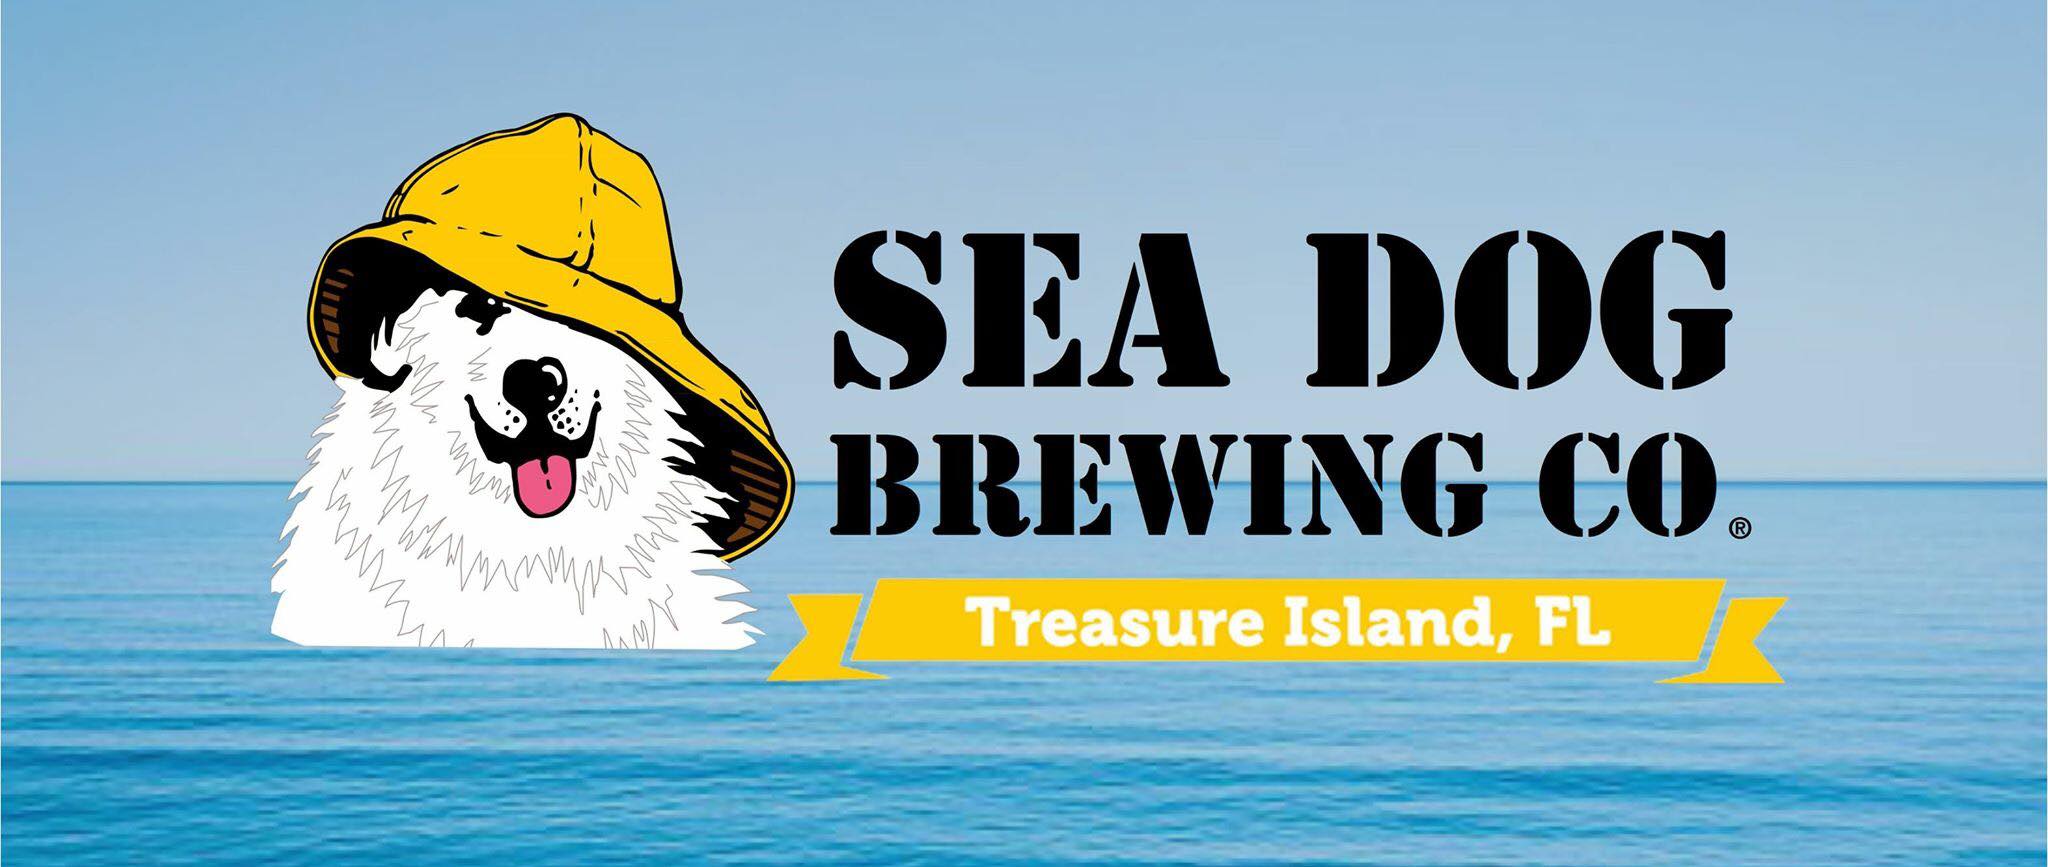 CLIENT NEWS: Sea Dog Brew Pub Announces Opening of Boat Docks